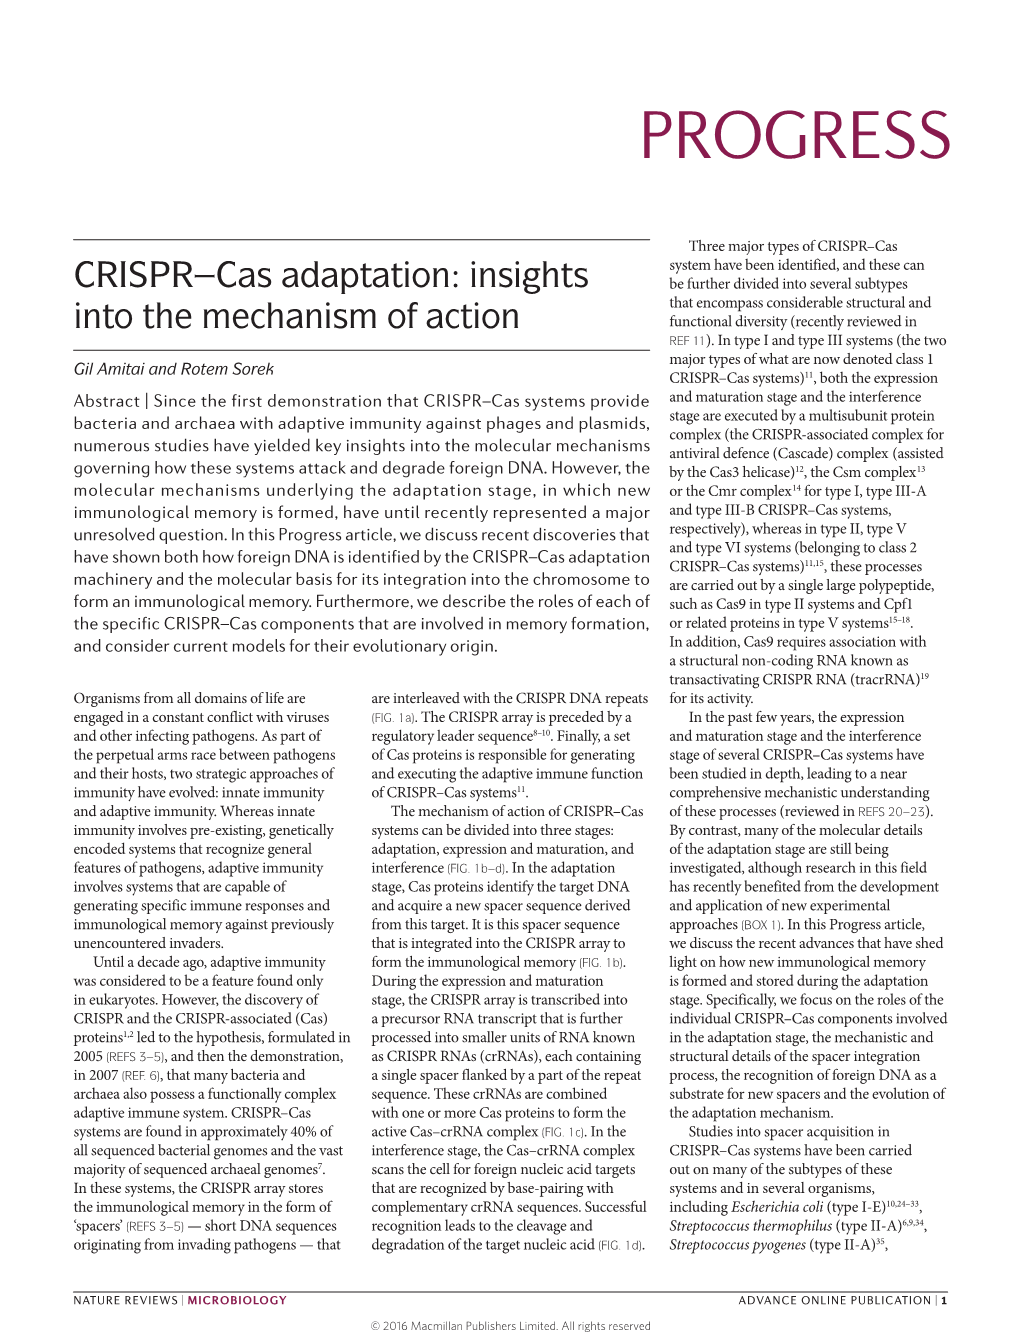 CRISPR–Cas Adaptation: Insights Into the Mechanism of Action